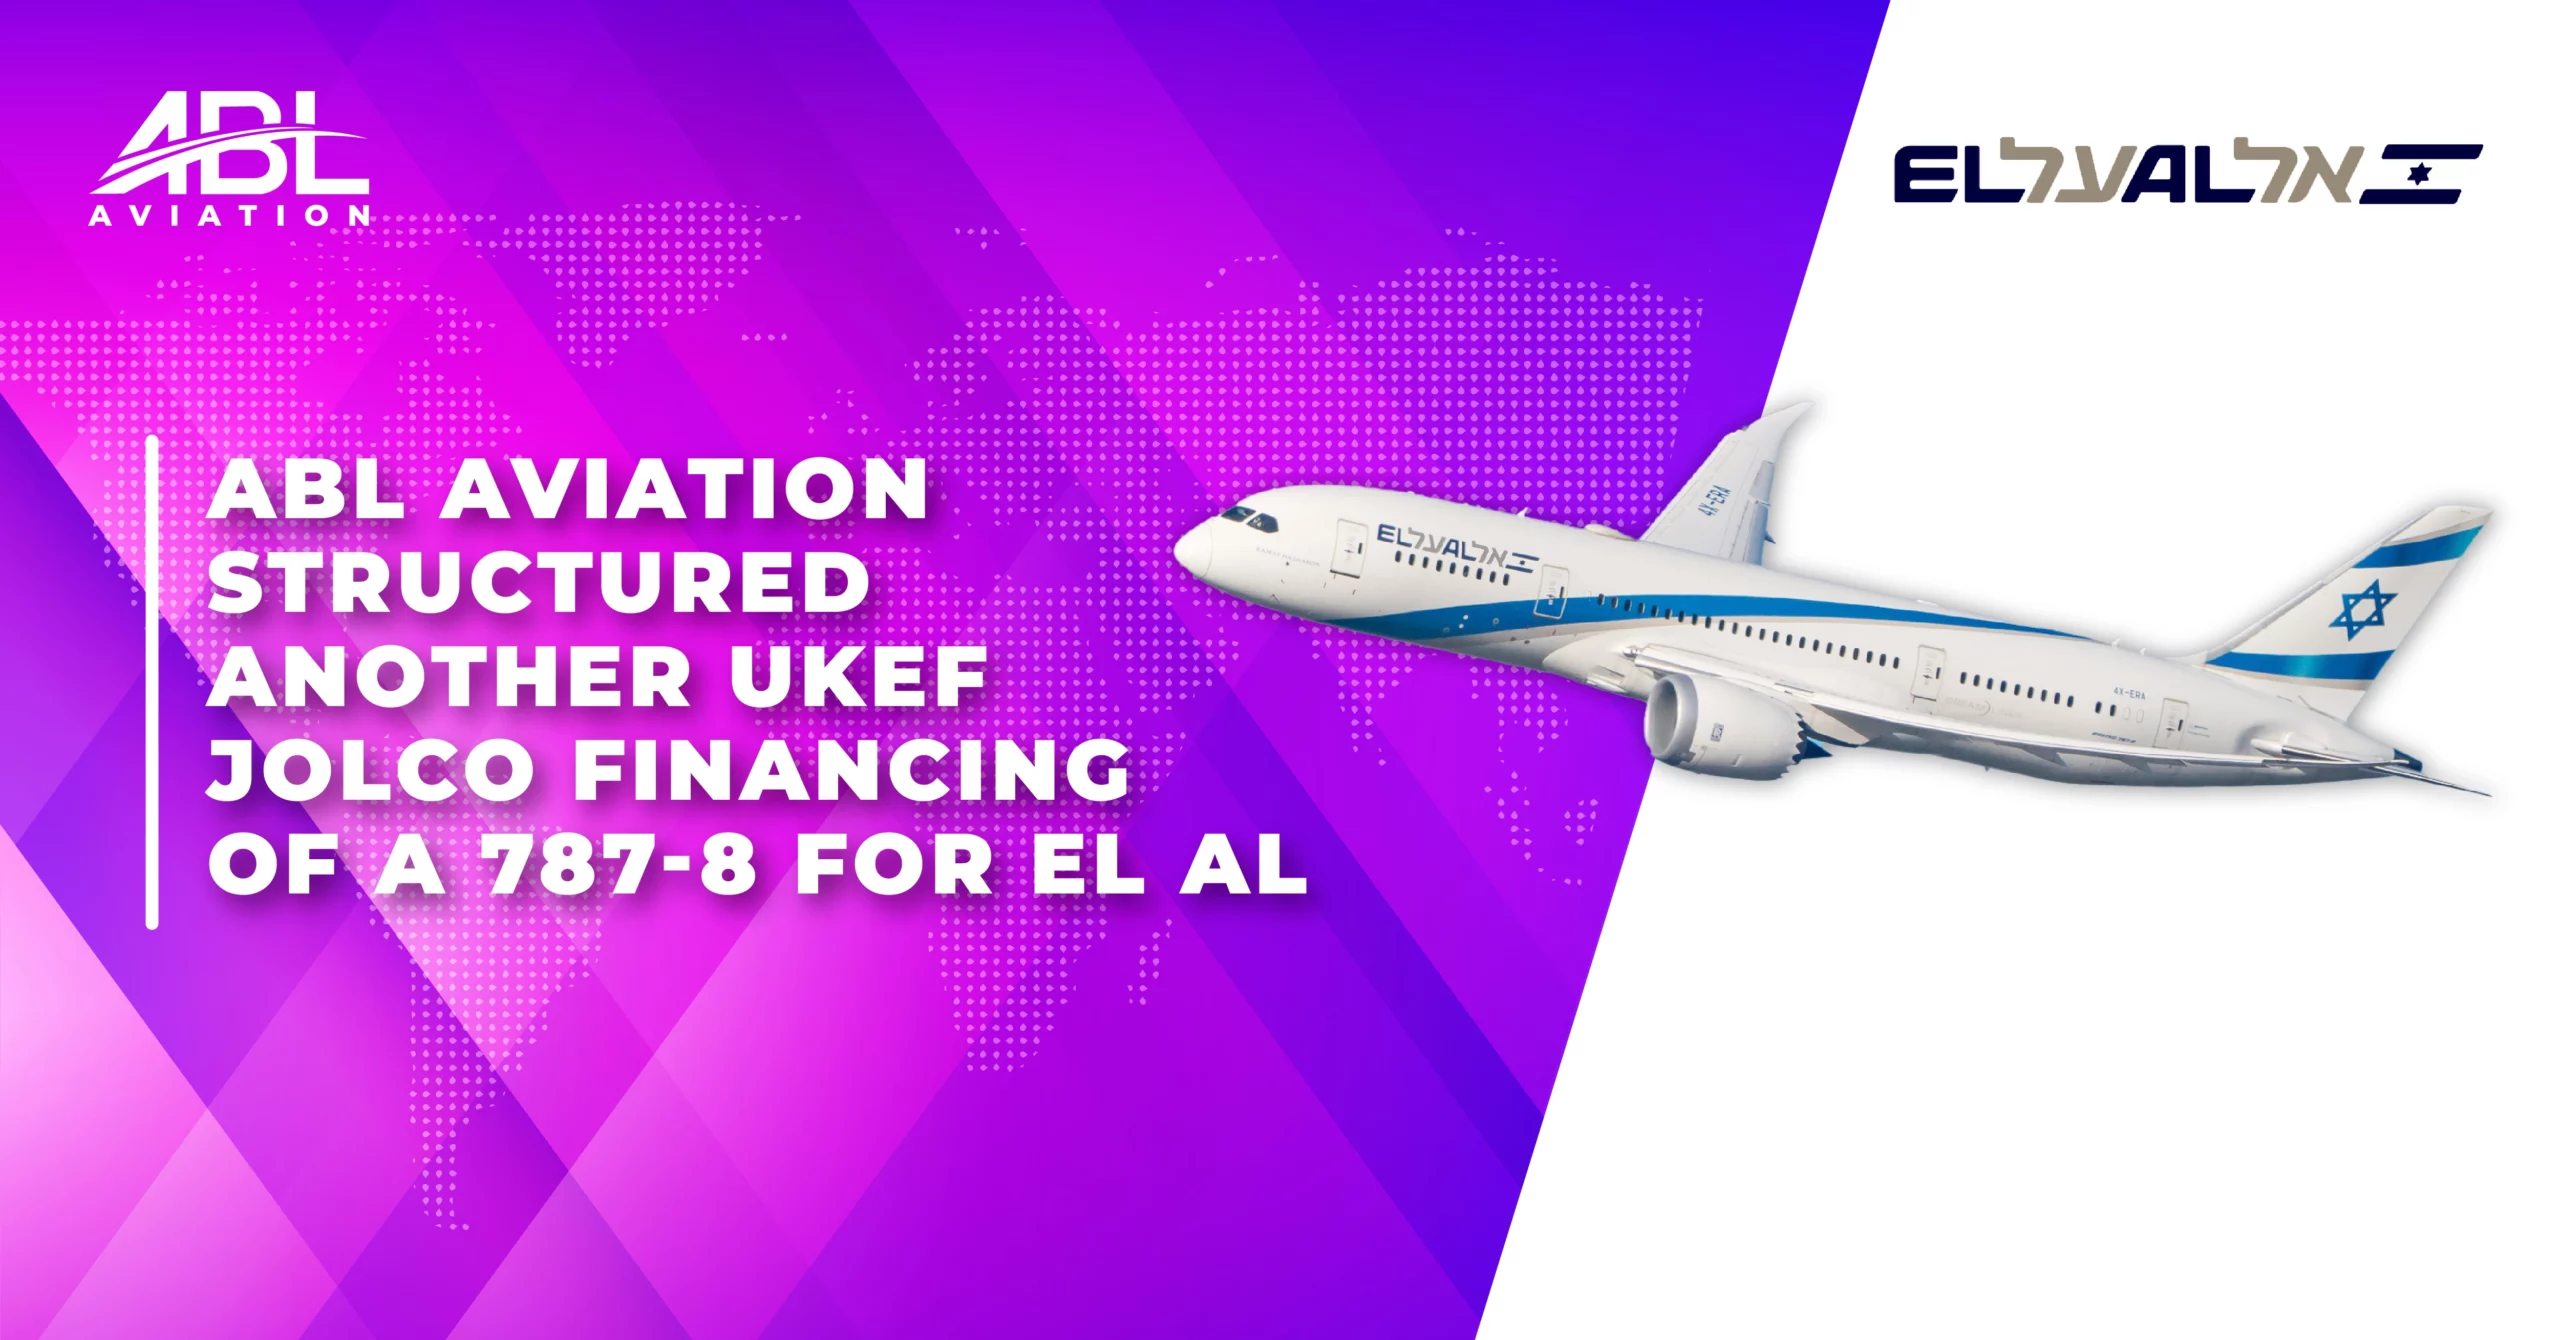 ABL Aviation Structured Another UKEF JOLCO Financing of a 787-8 for EL AL